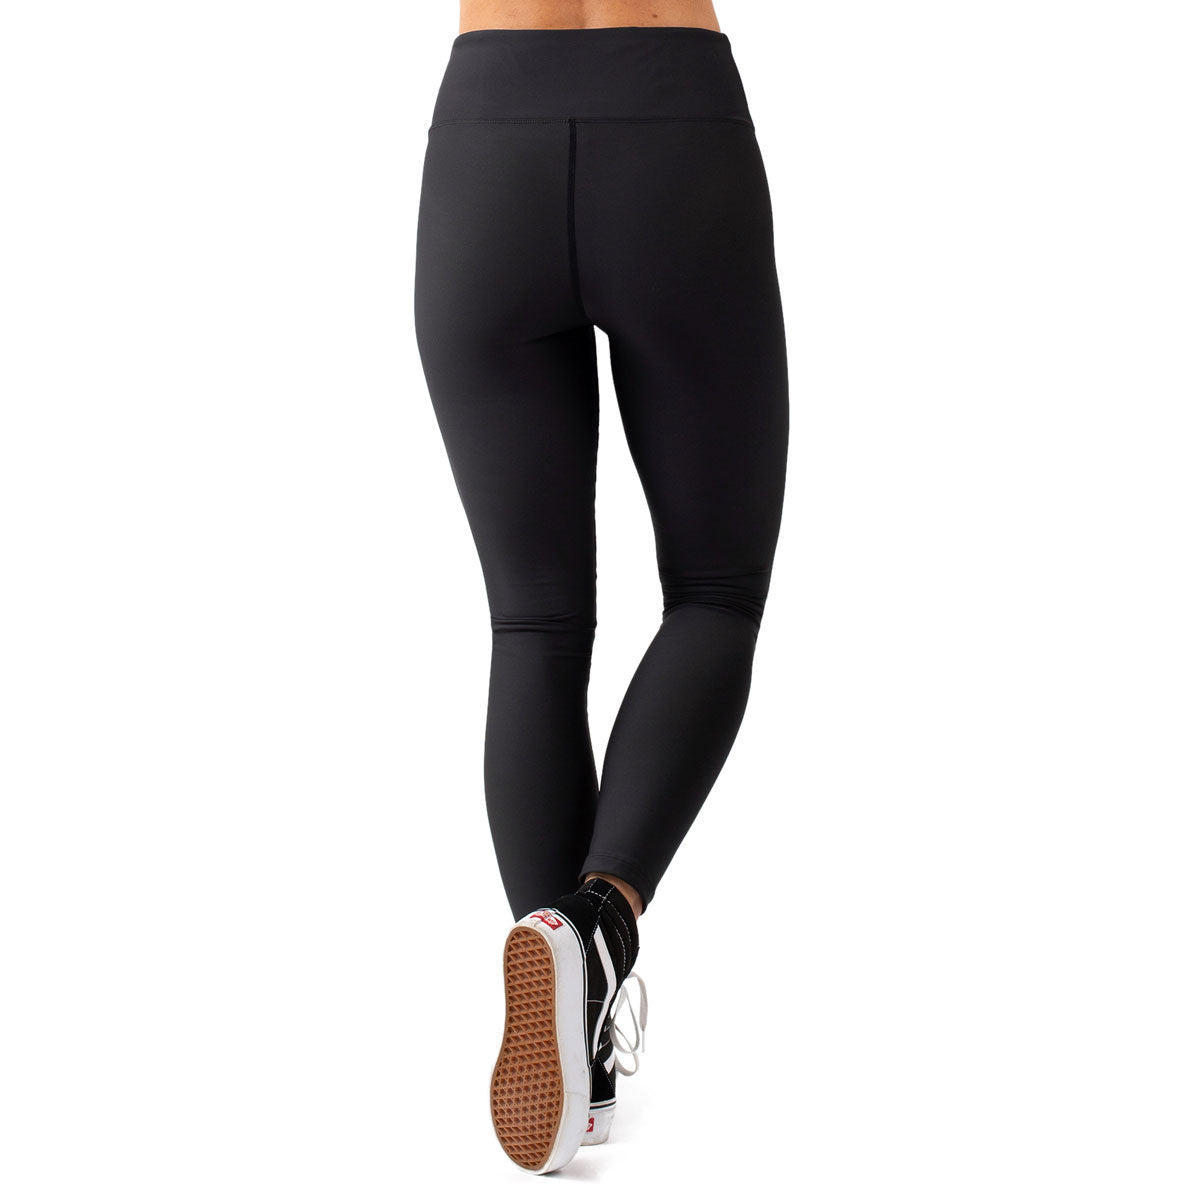 Eivy Icecold Tights Snowboard Base Layer - Team Black image 2